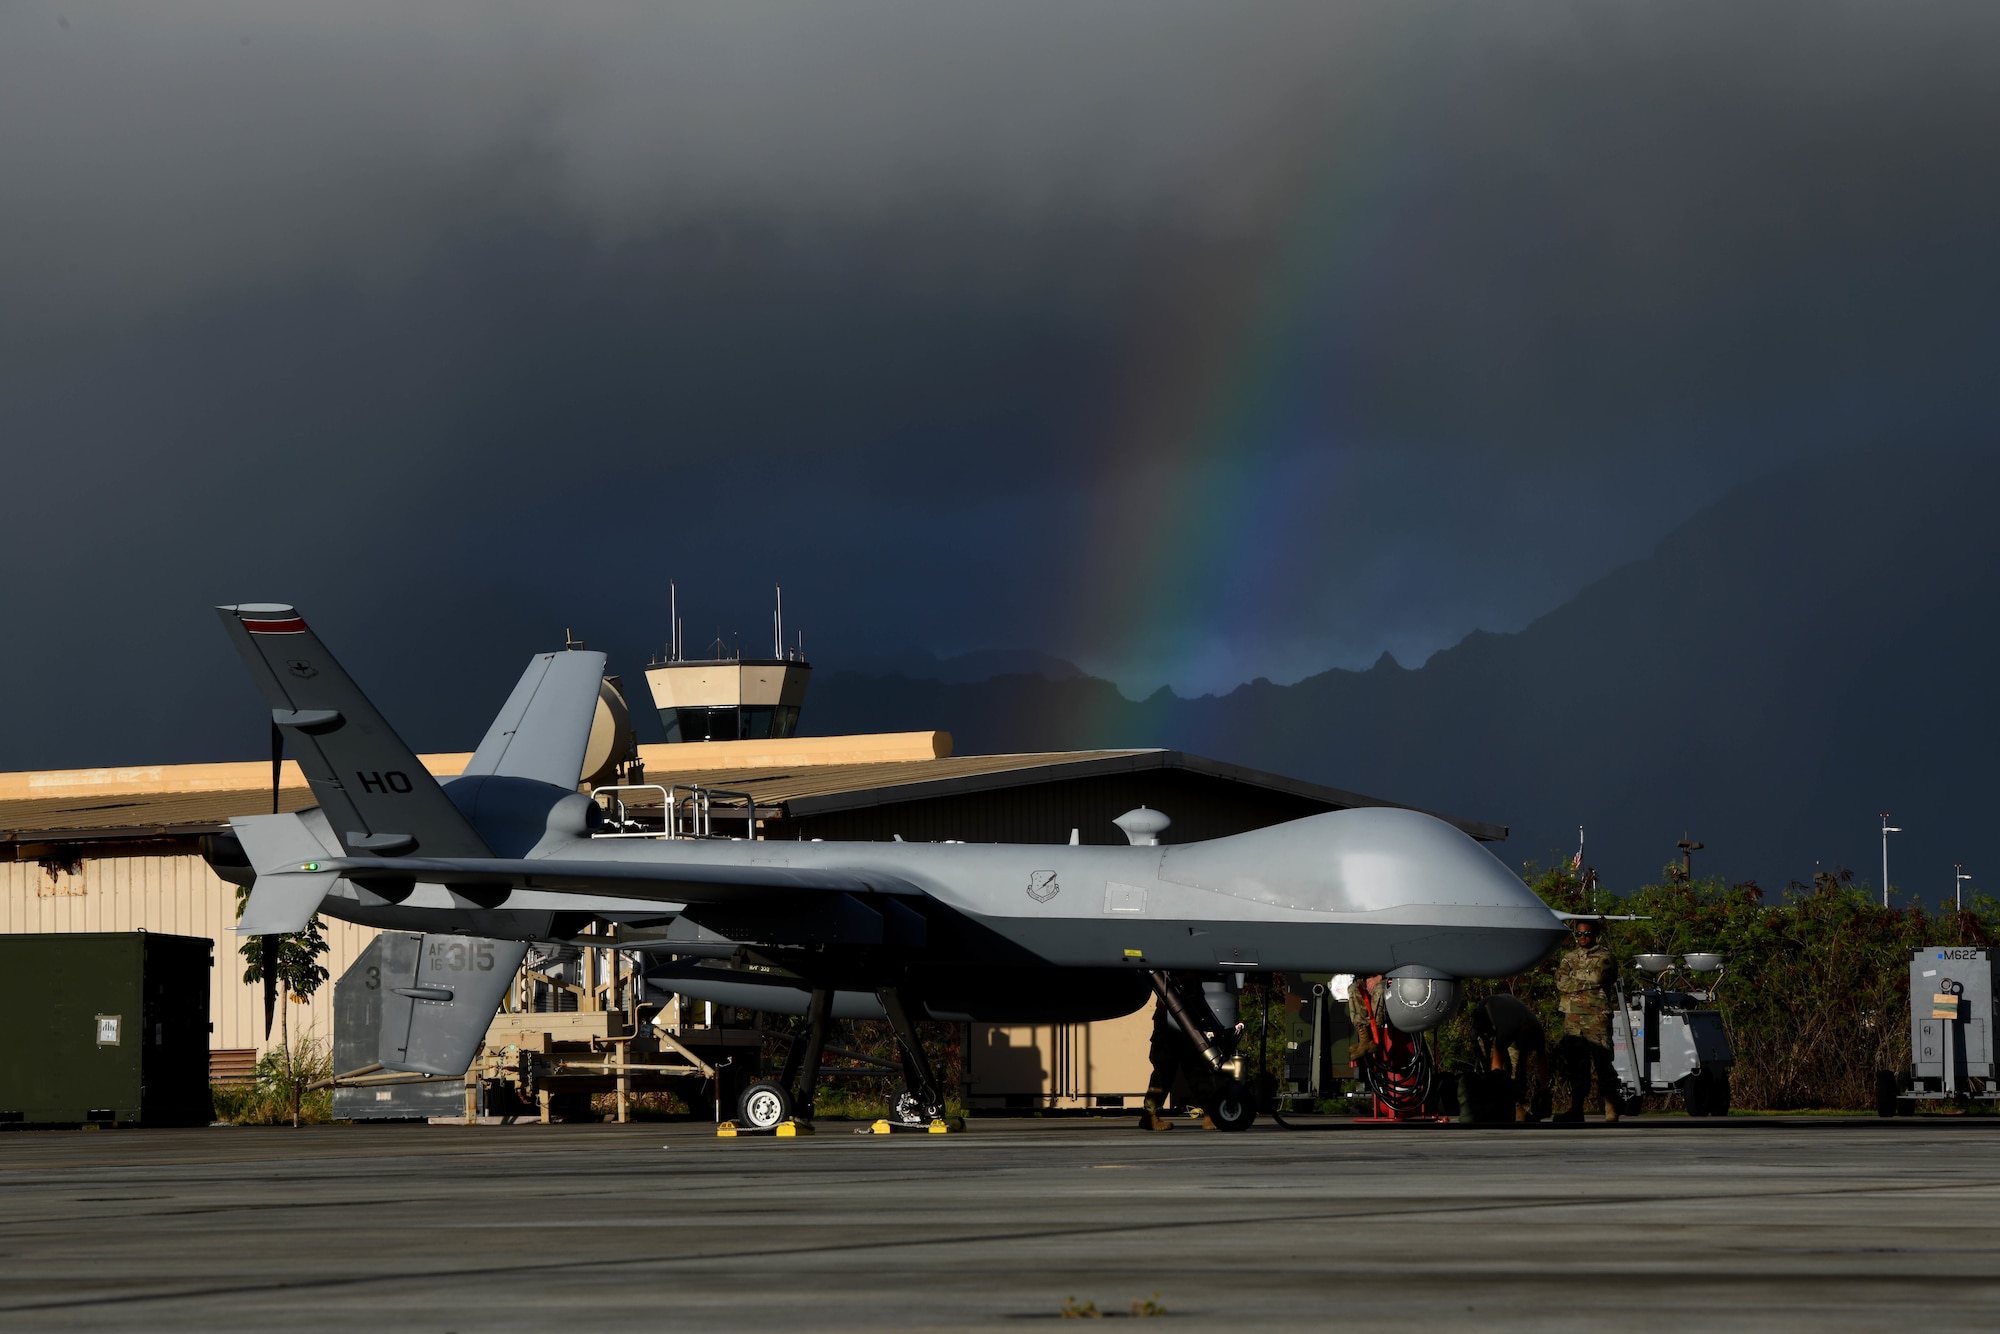 MARINE CORPS AIR STATION, KANEOHE BAY, Hawaii (July 25, 2022) An MQ-9 Reaper assigned to the 49th Wing at Holloman Air Force Base, N.M., sits on the taxi way prior to takeoff during Rim of the Pacific (RIMPAC) 2022, July 25, at Marine Corps Air Station Kaneohe Bay, Hawaii.